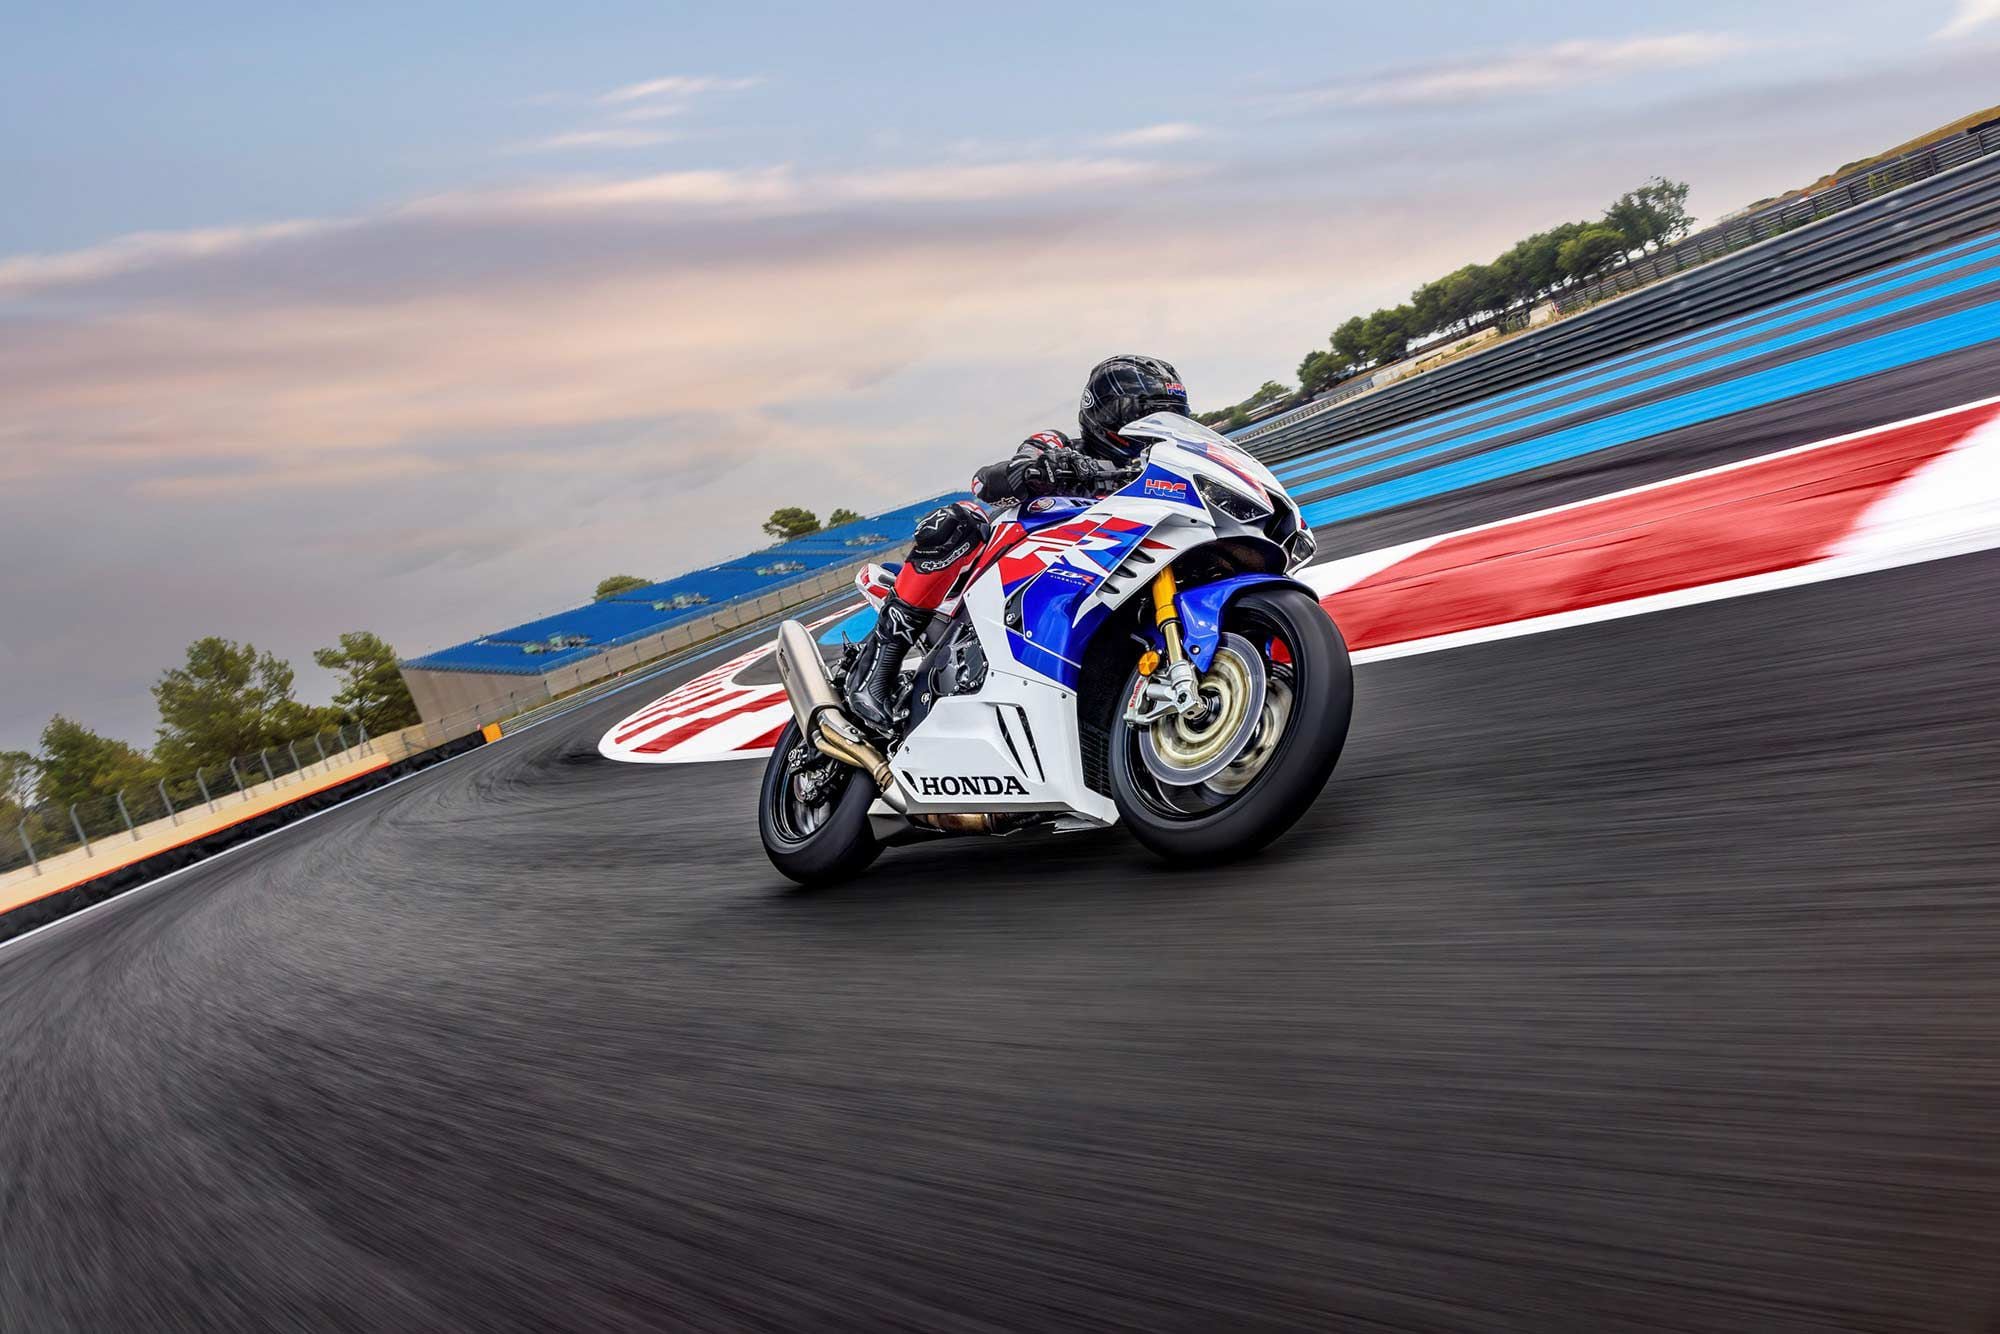 Honda’s 2022 Fireblade gets significant changes in the engine department, including a new airbox and revised intake ports.